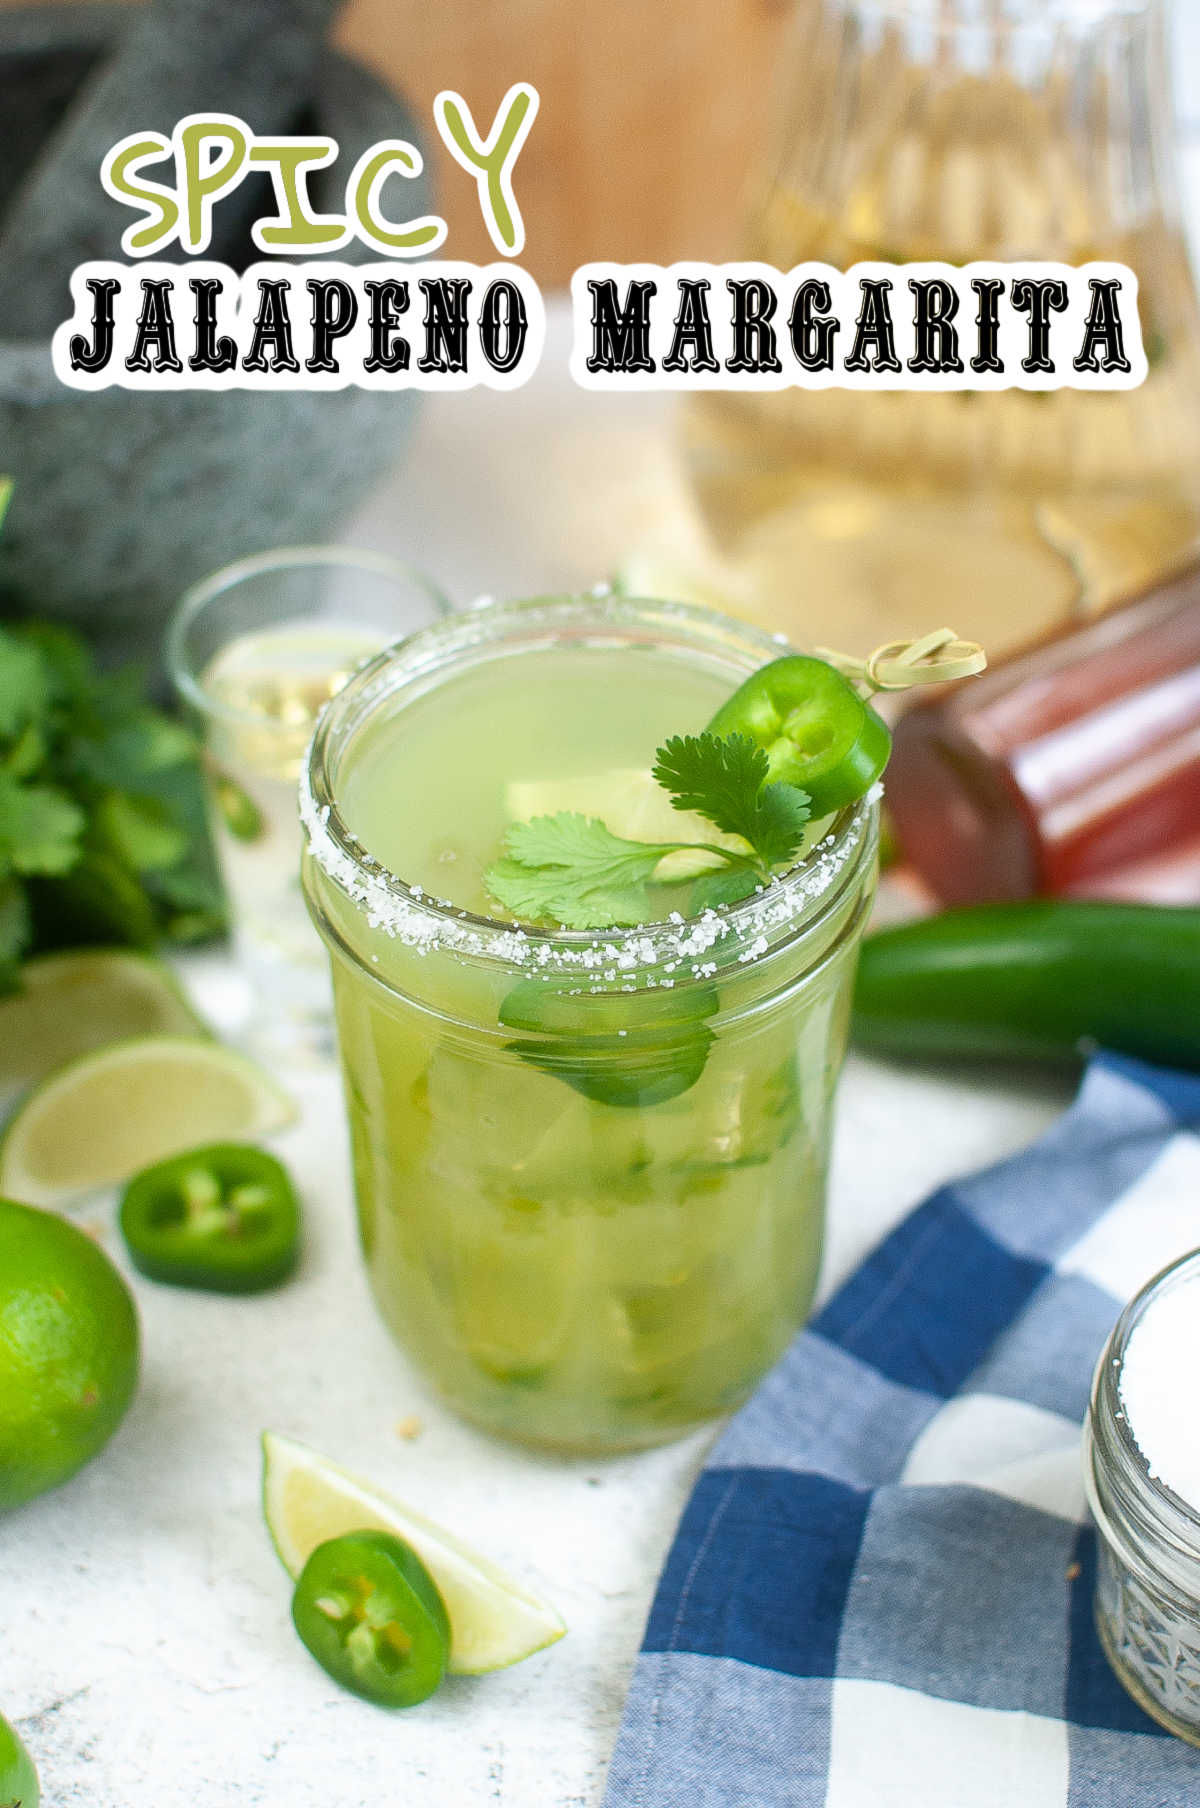 Spicy Jalapeno Margarita with all the ingredients laying around the glass